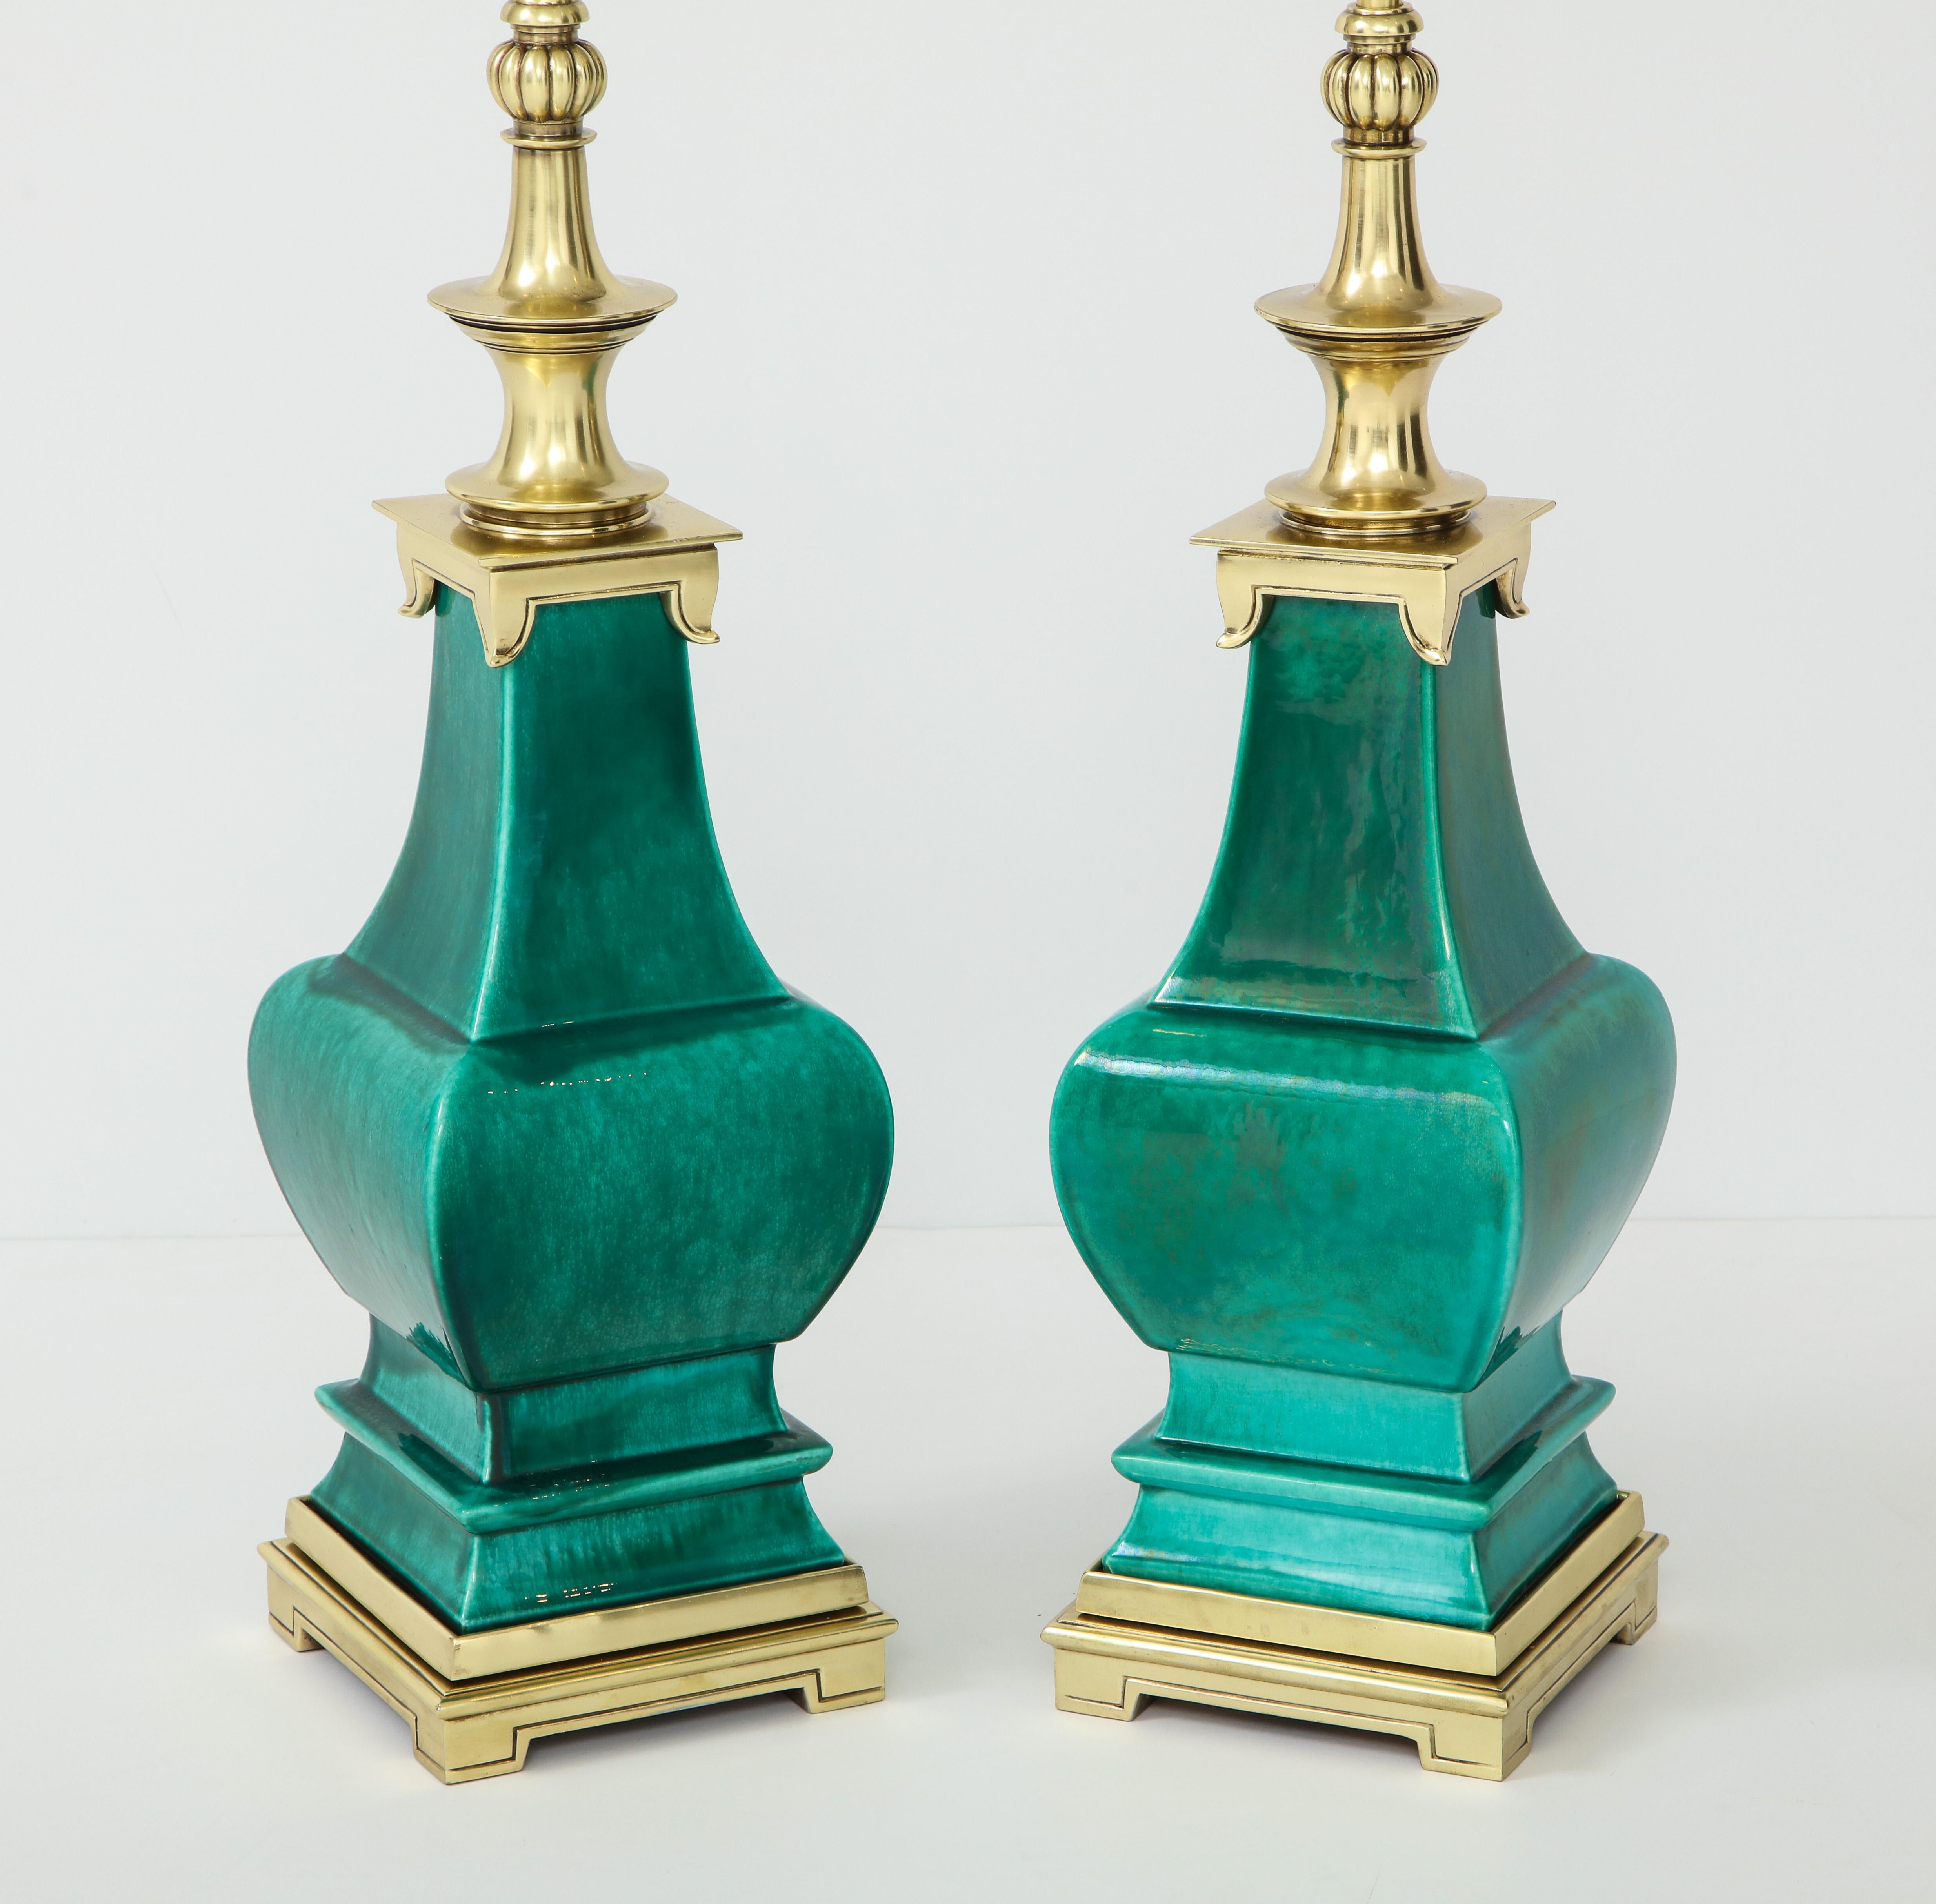 Chinoiserie Pair of Jade Green Ceramic Lamps by Stiffel